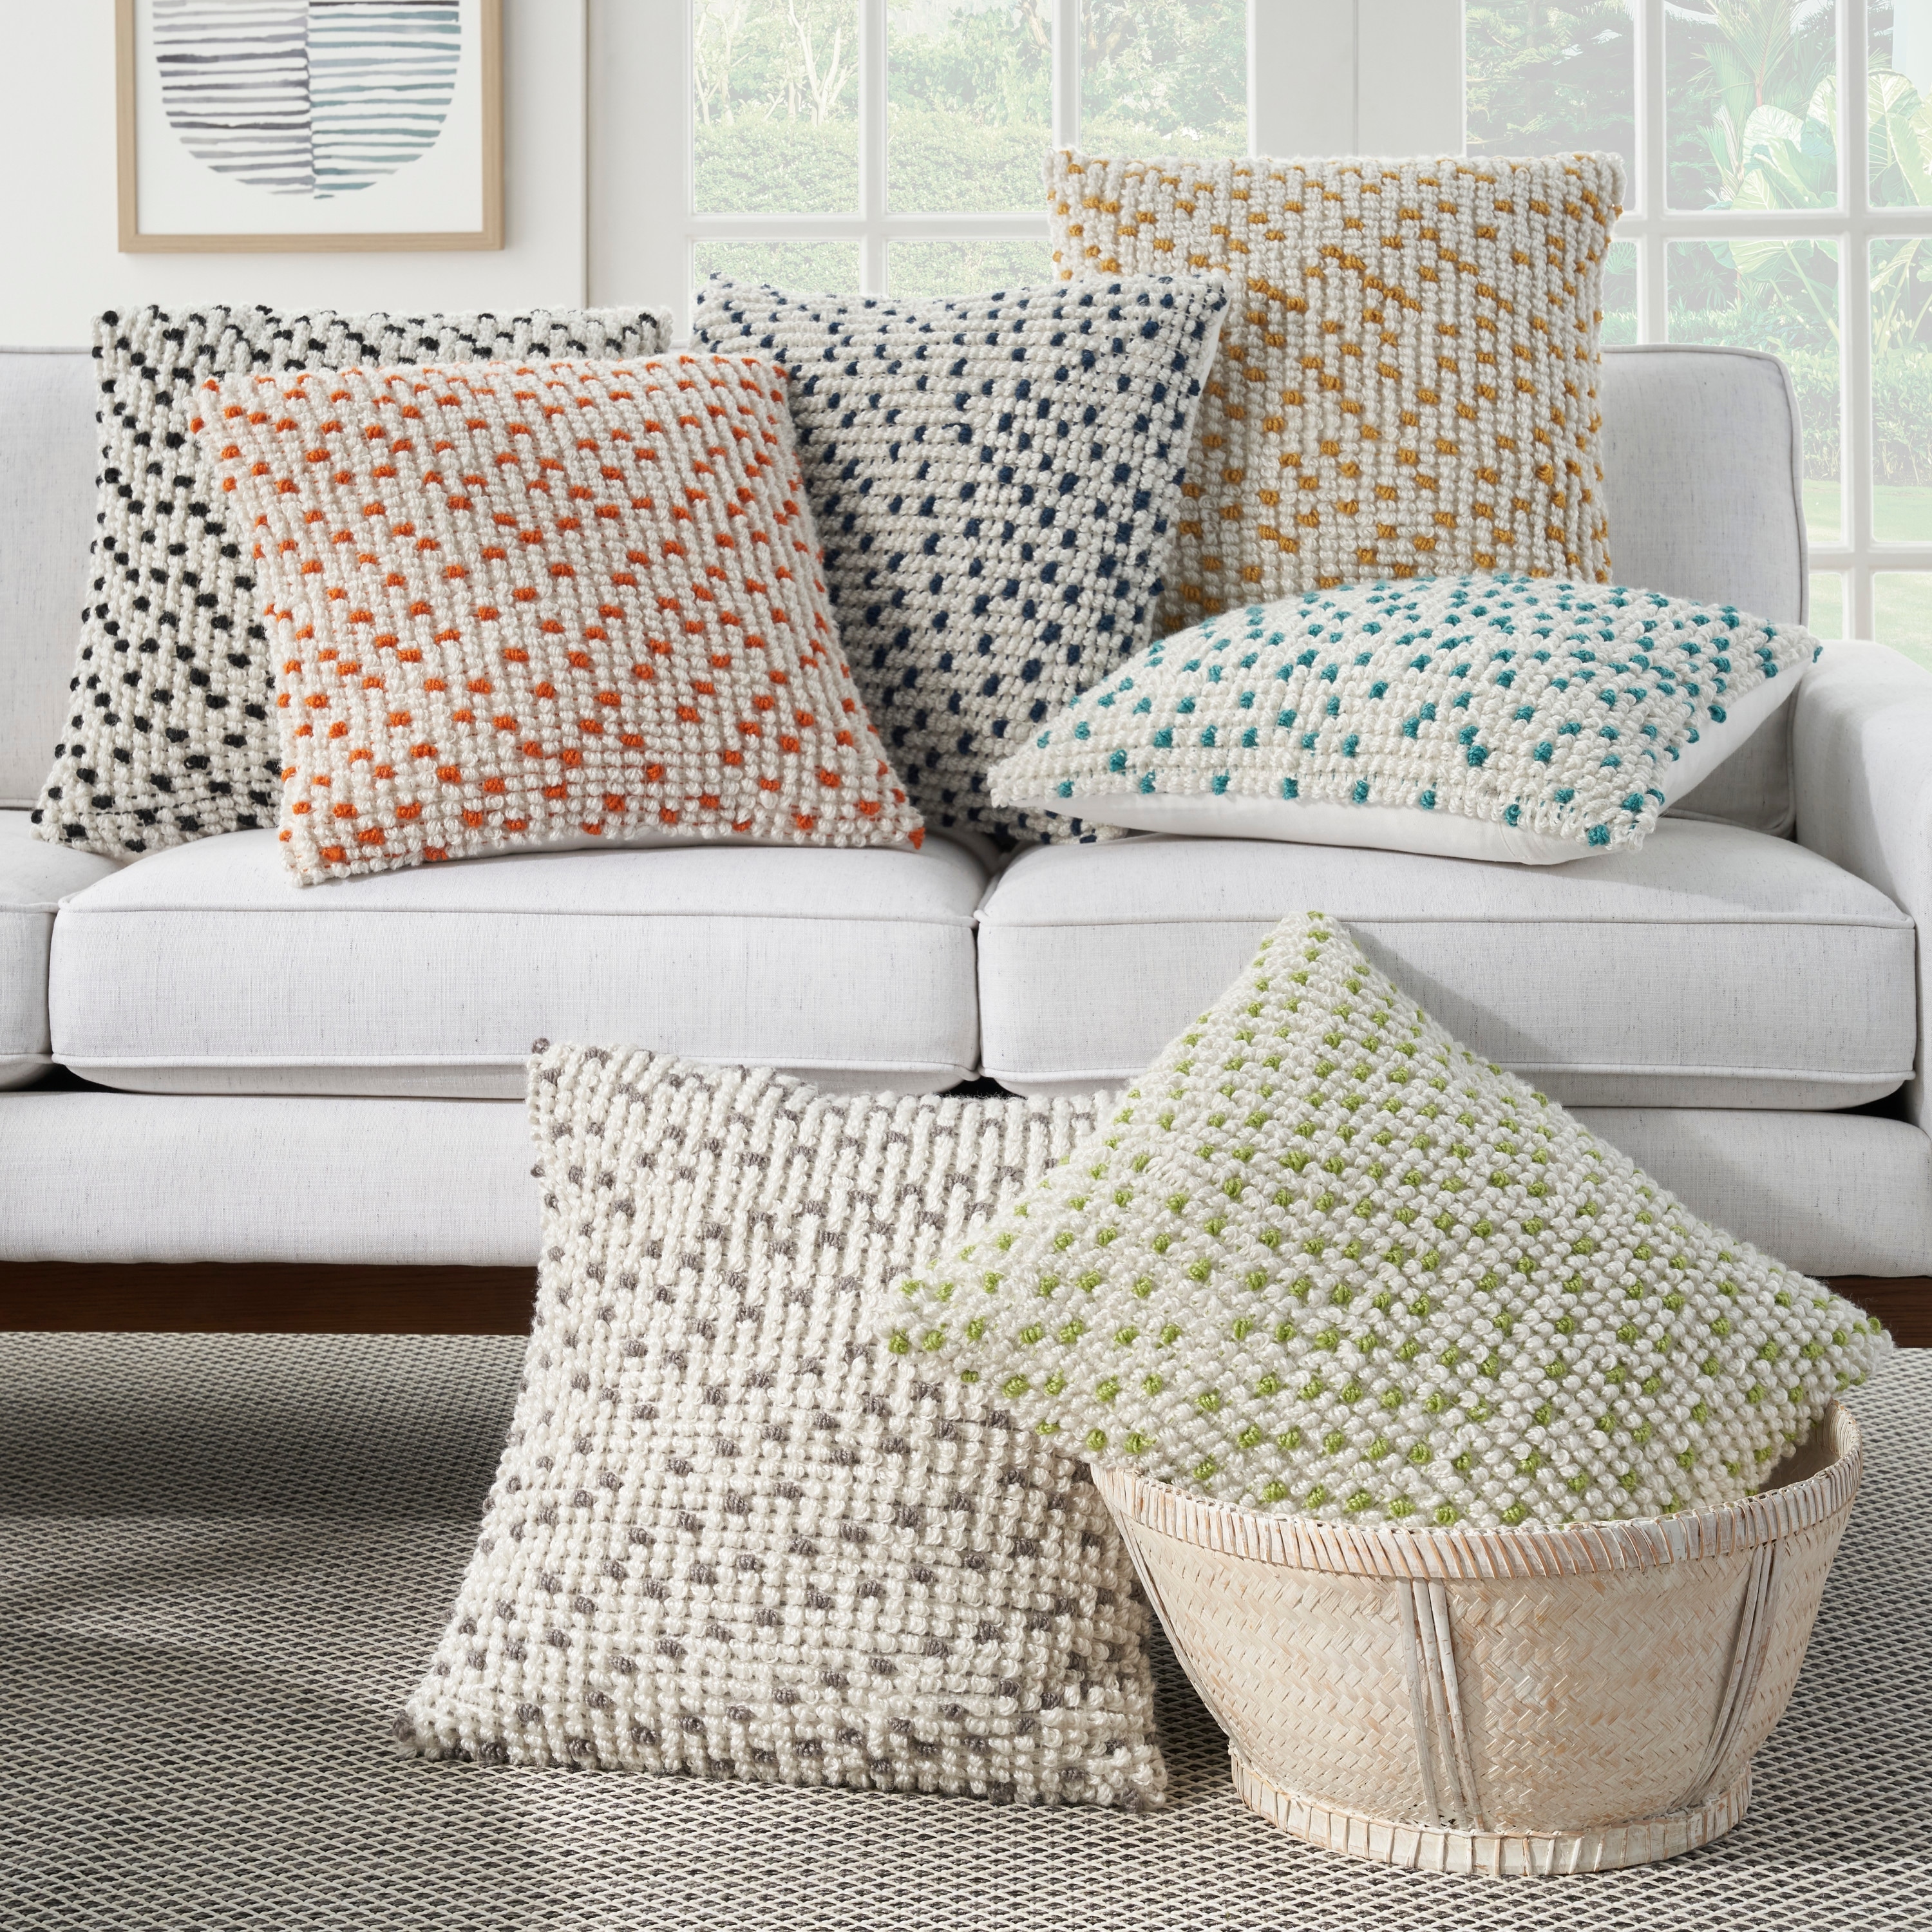 Square Decorative Accents Pillow Cushion Cases for Living Room Bed Room or Farmhouse Geometric Flowers Pillowcases CARROLL Outdoor Throw Pillow Covers for Couch Sofa 18x18 Inch Set of 4